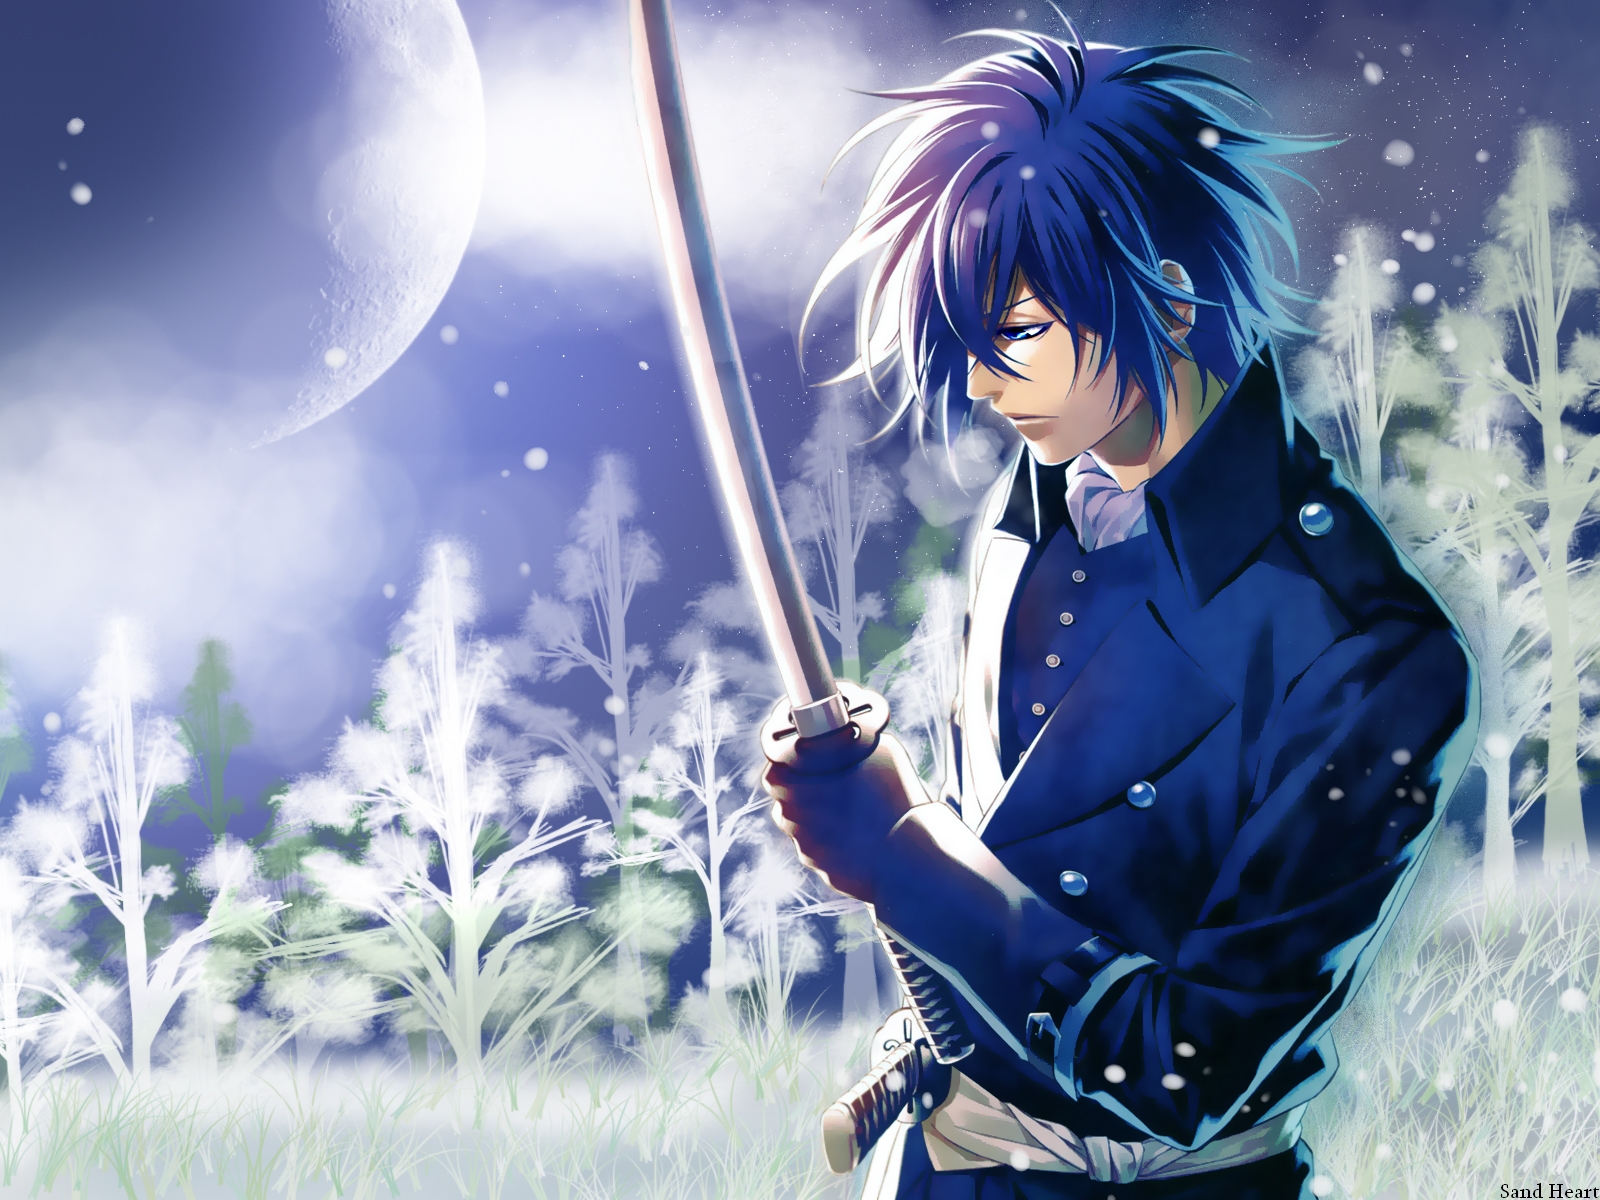 sword anime guy with blue hair 1600x1200 wallpaper teahub io sword anime guy with blue hair